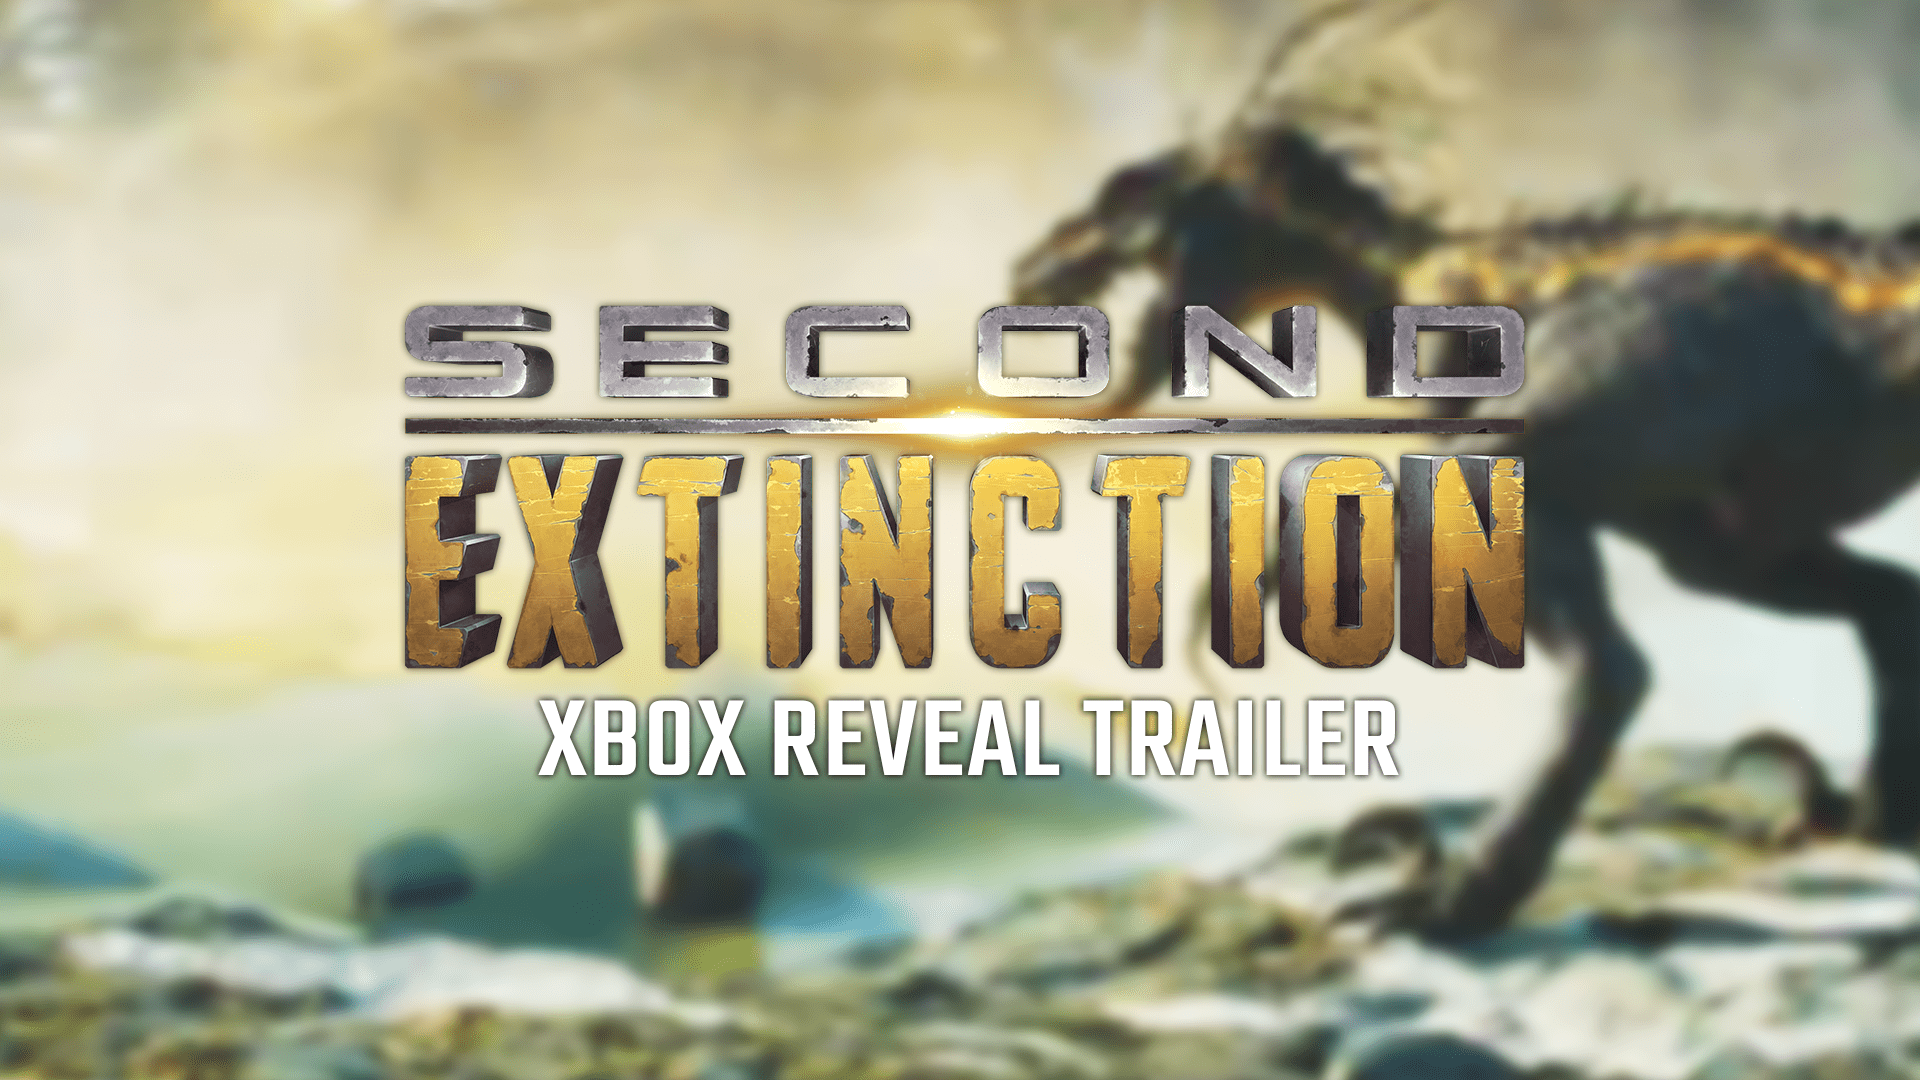 Second Extinction Xbox Reveal Trailer out now!